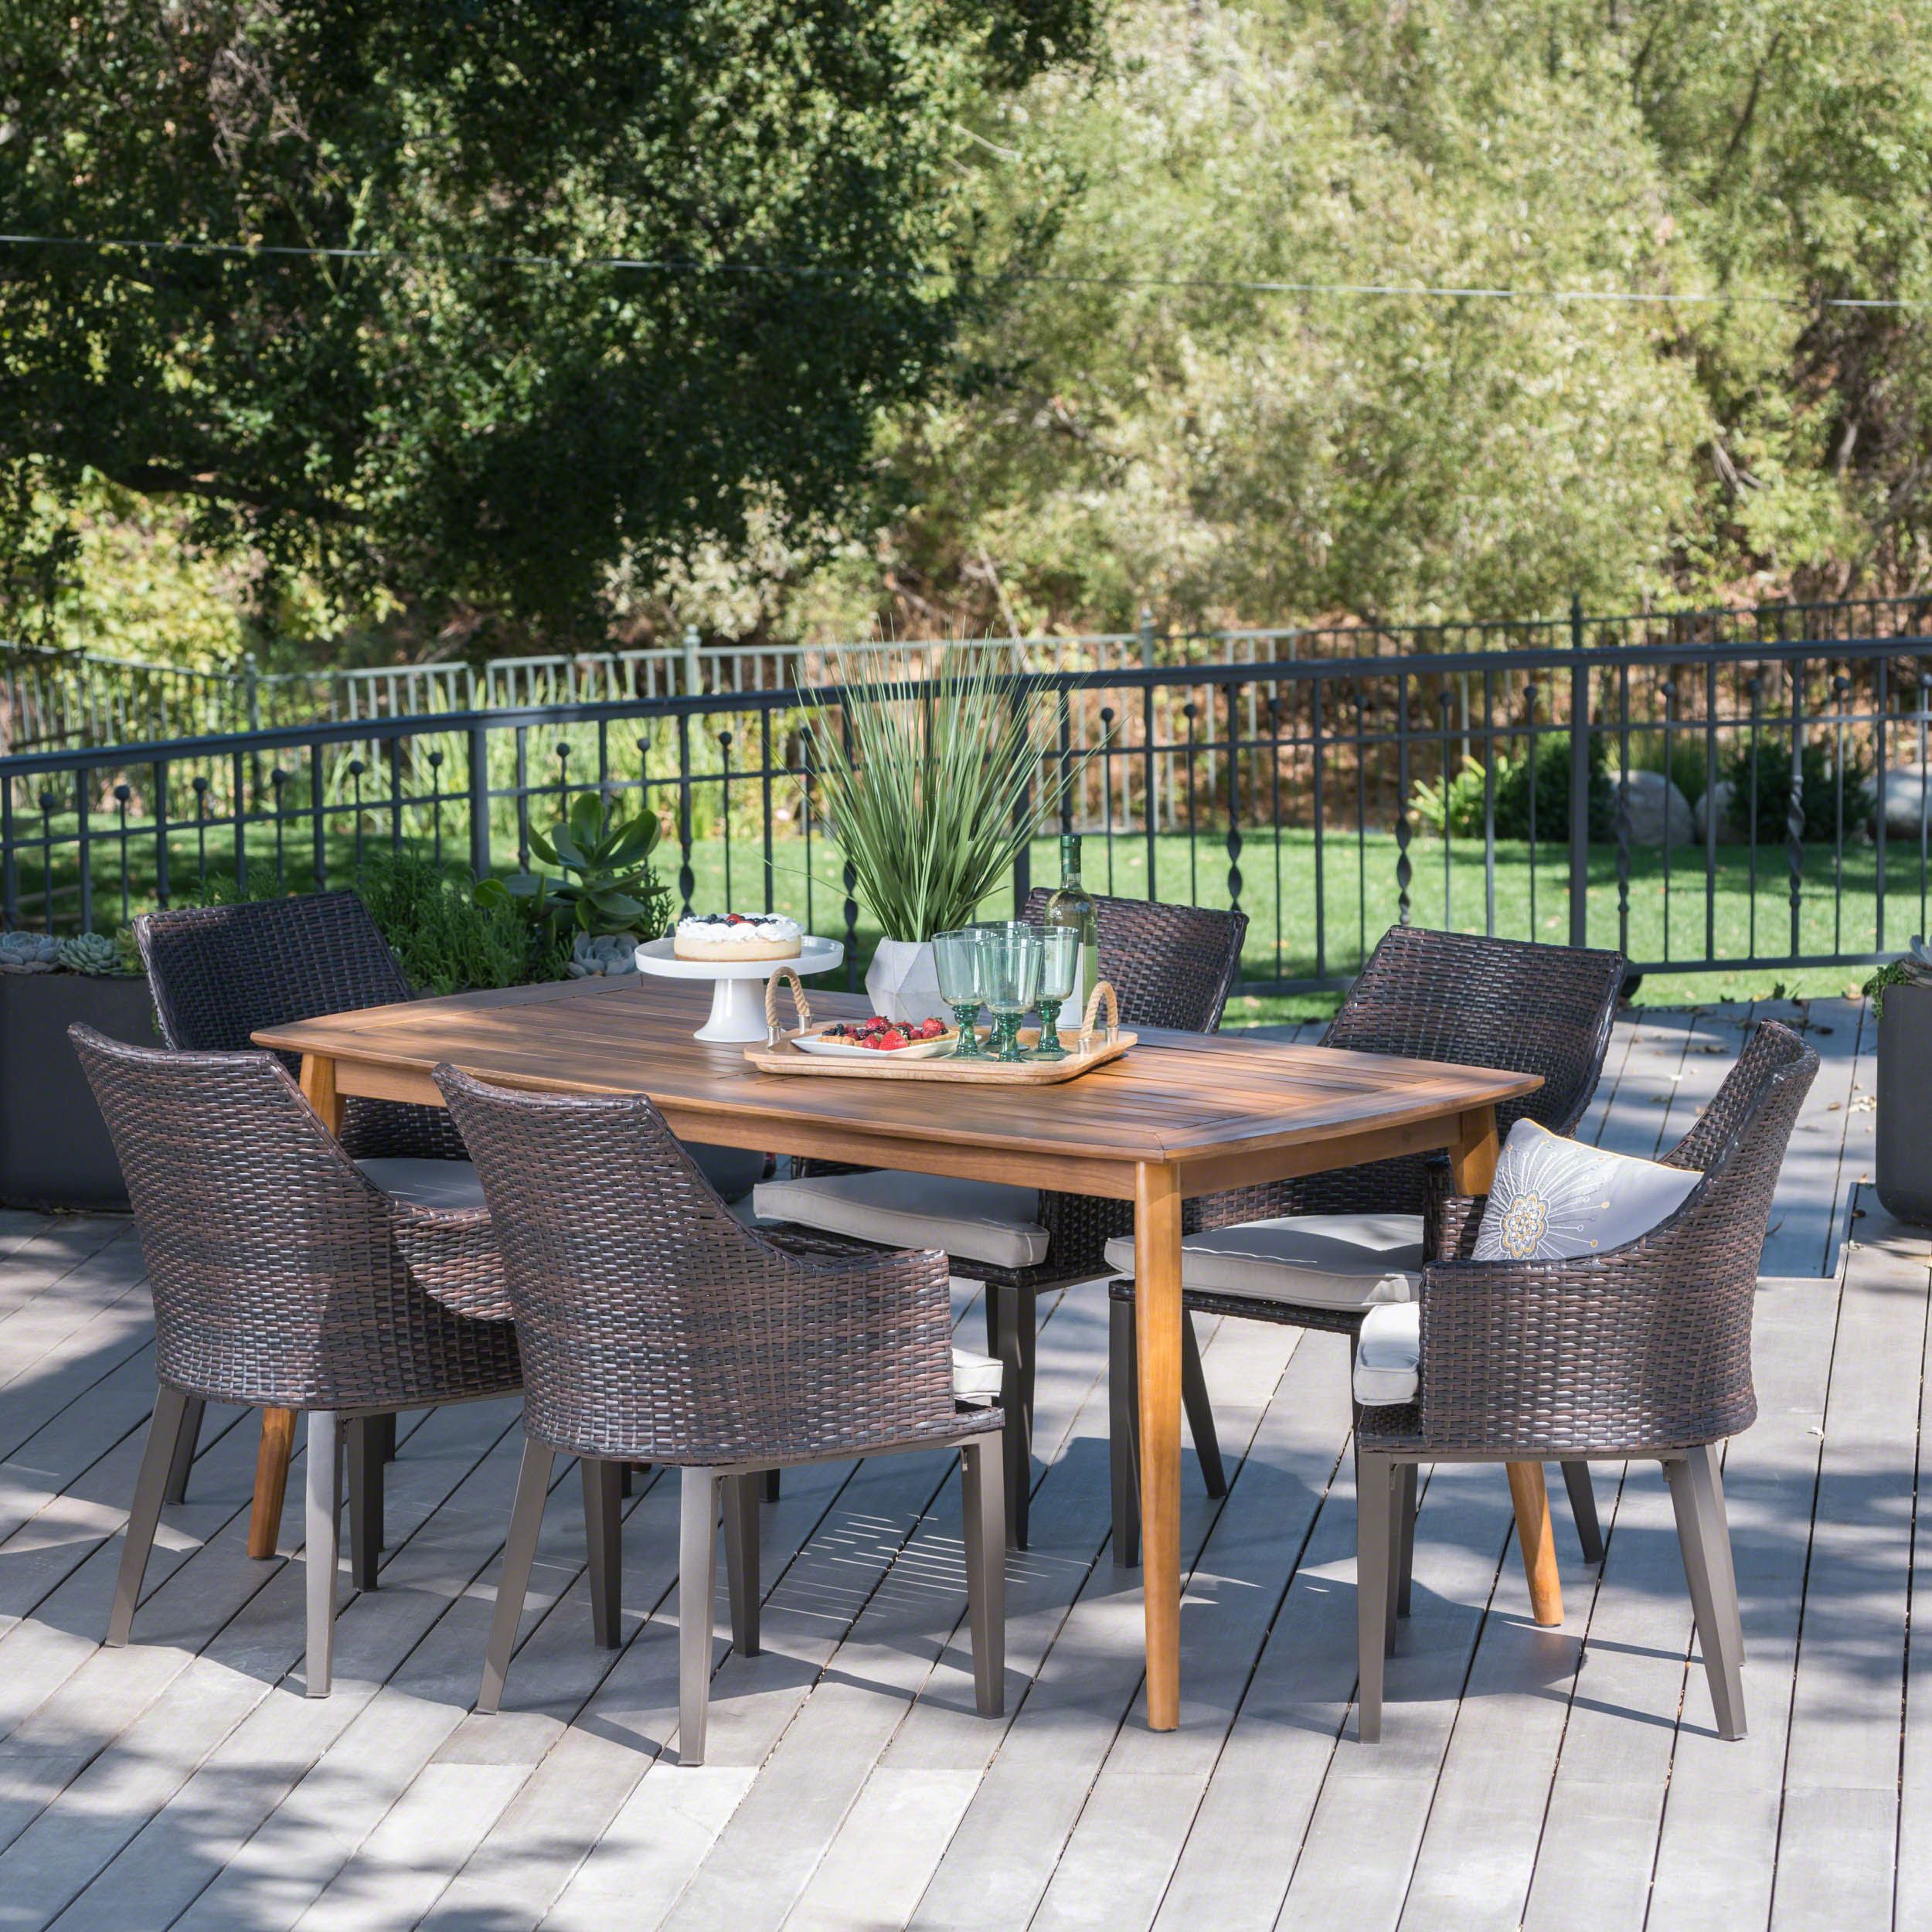 Alexa Outdoor 7 Piece Wicker Rectangular Dining Set With Acacia Wood Within Rectangular Patio Dining Sets (View 4 of 15)